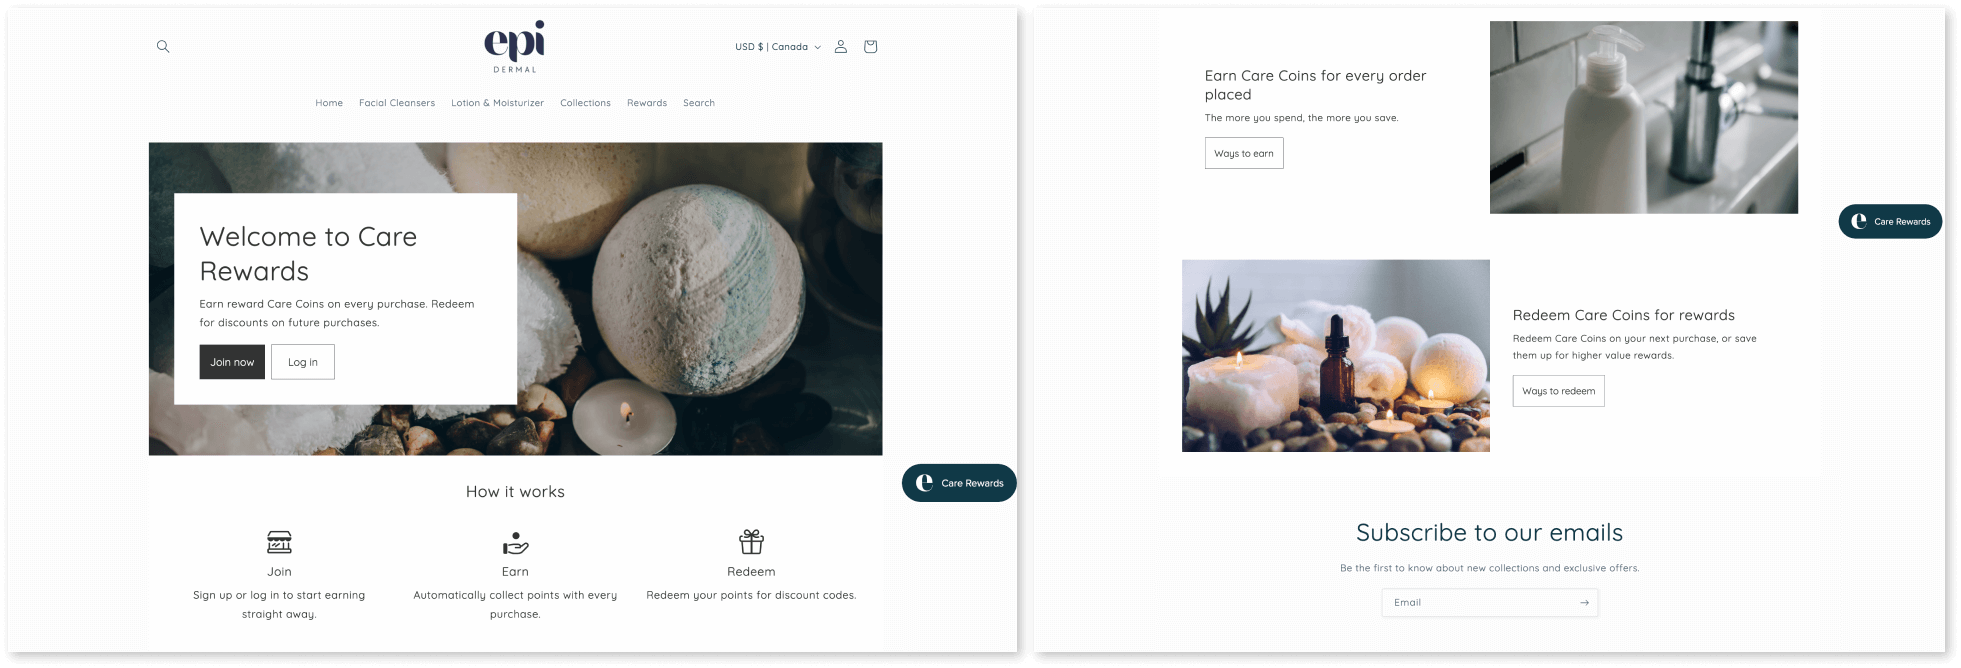 2 side-by-side screenshots showing a loyalty landing page for a skincare brand. There is a banner image with a call to action to join the program, a brief overview of how it works, a section explaining how to earn rewards, and one describing how to redeem them. 